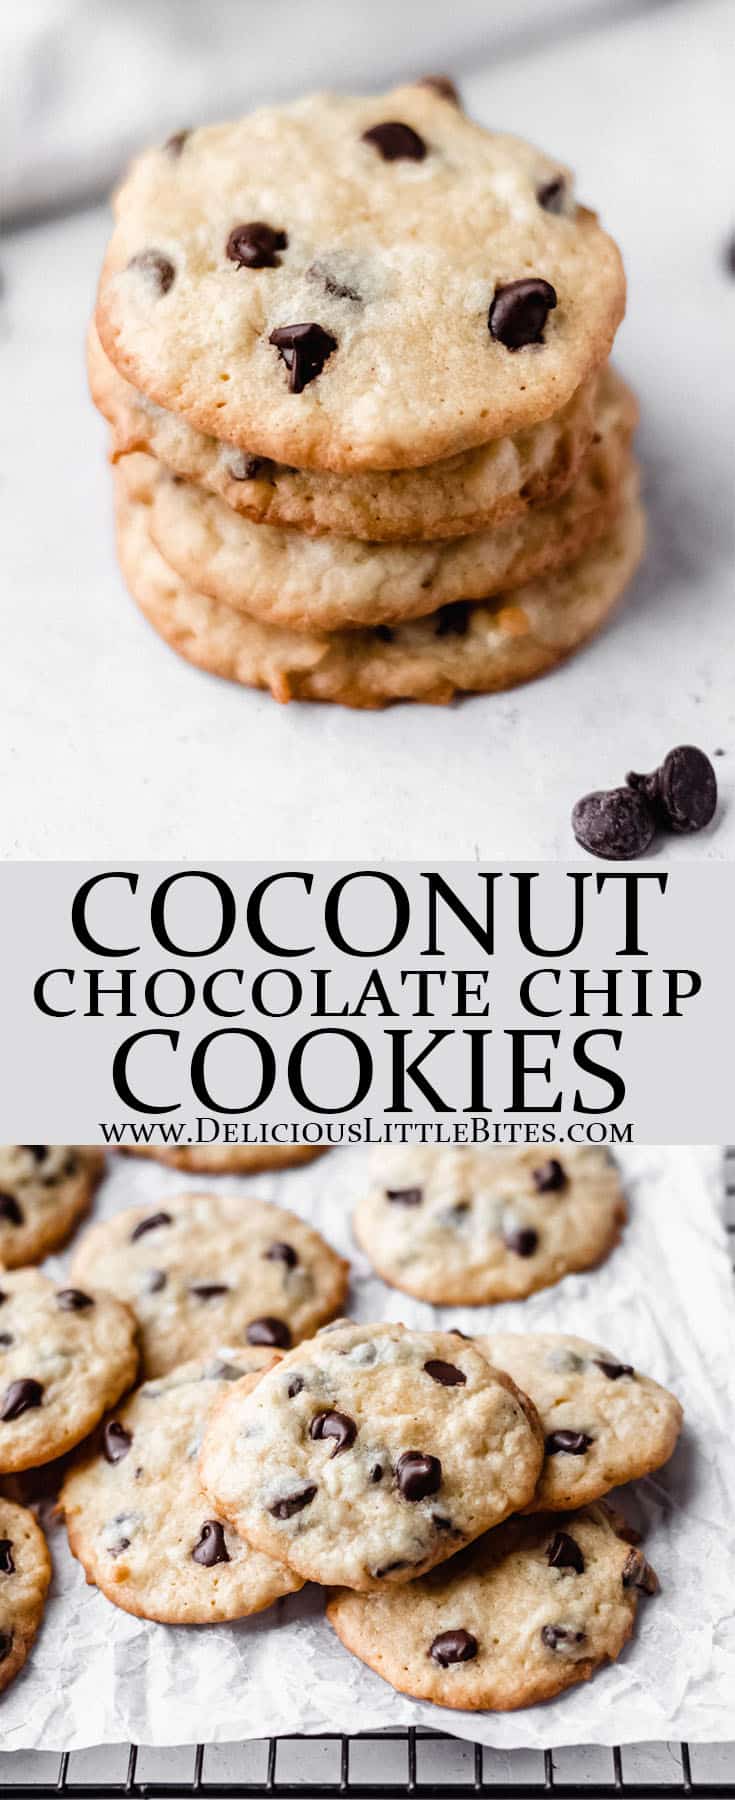 Chocolate Chip Coconut Cookies - Delicious Little Bites